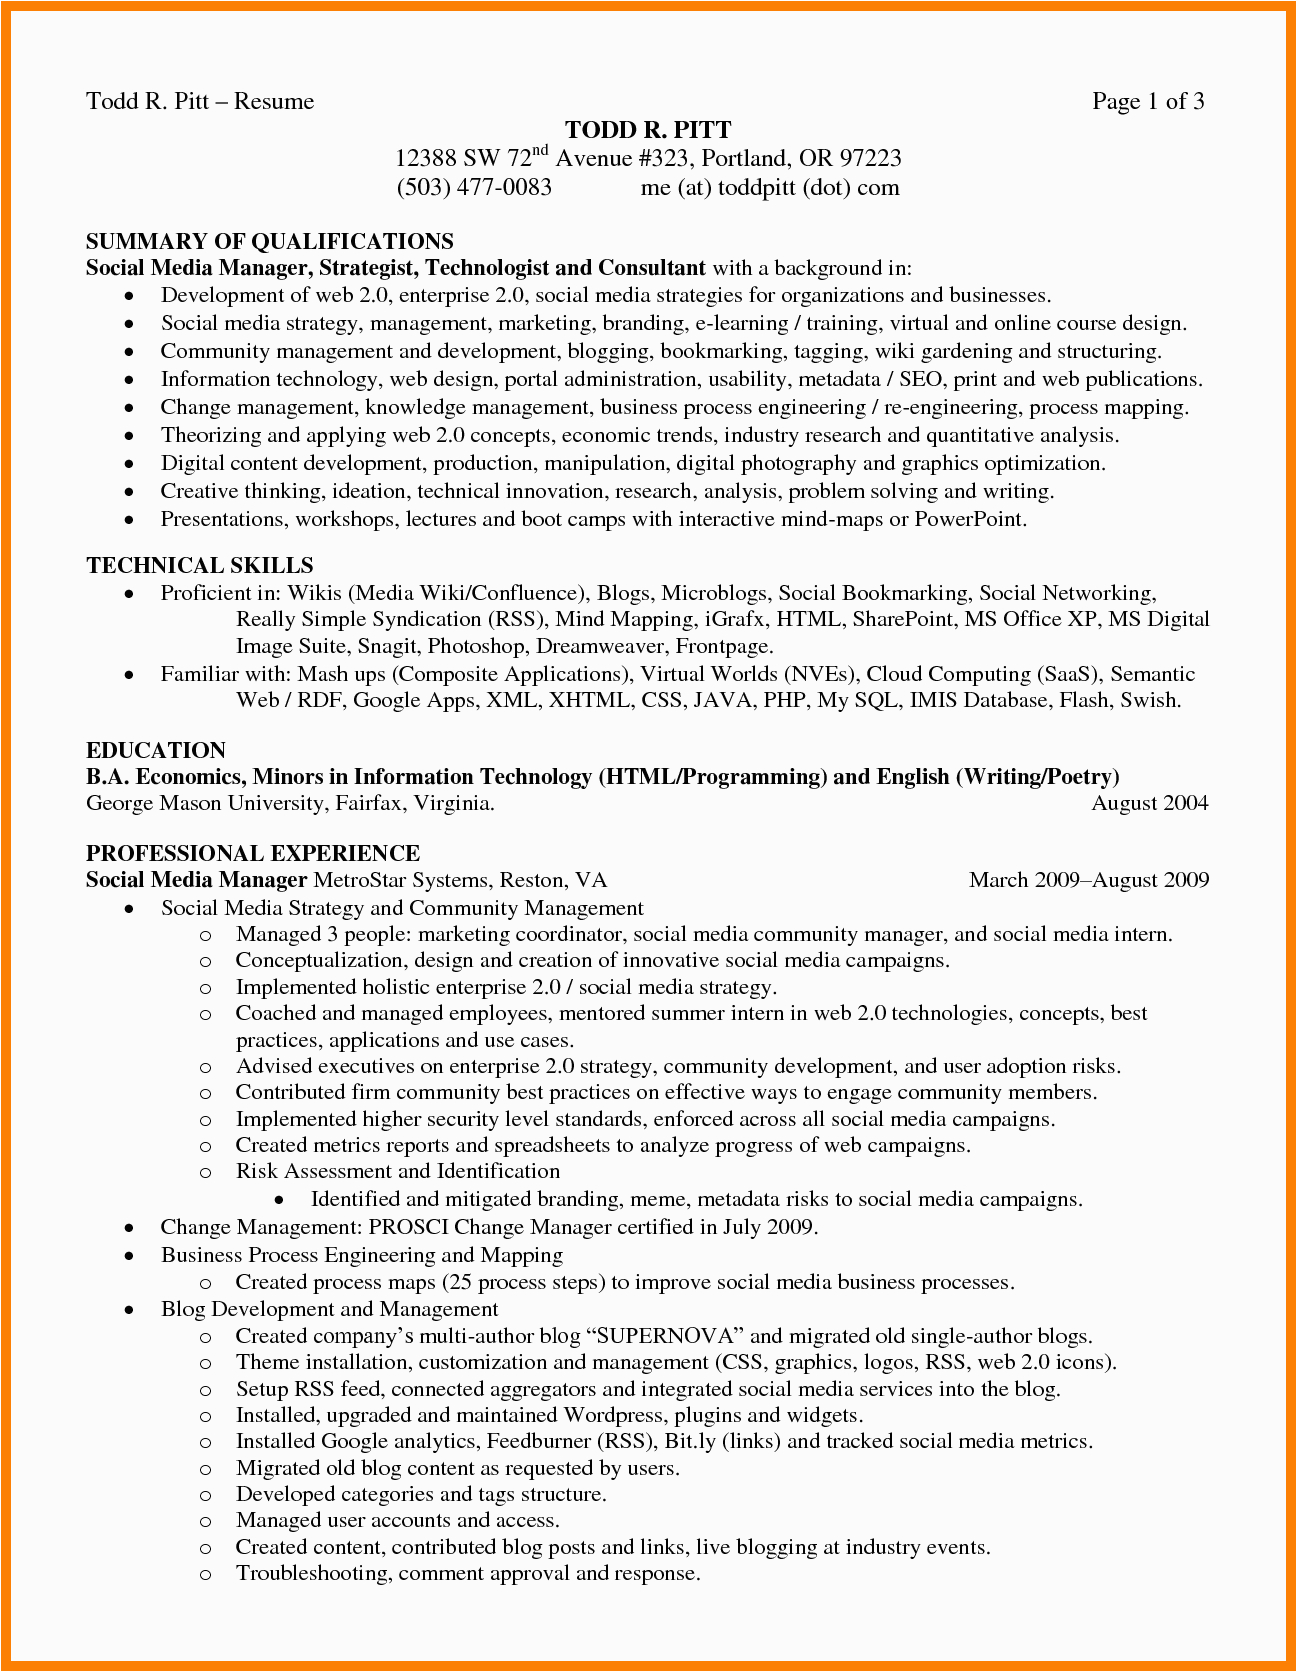 Sample Resume with Summary Of Qualifications format 6 Summary Of Qualification Resume Examples Ledger Review